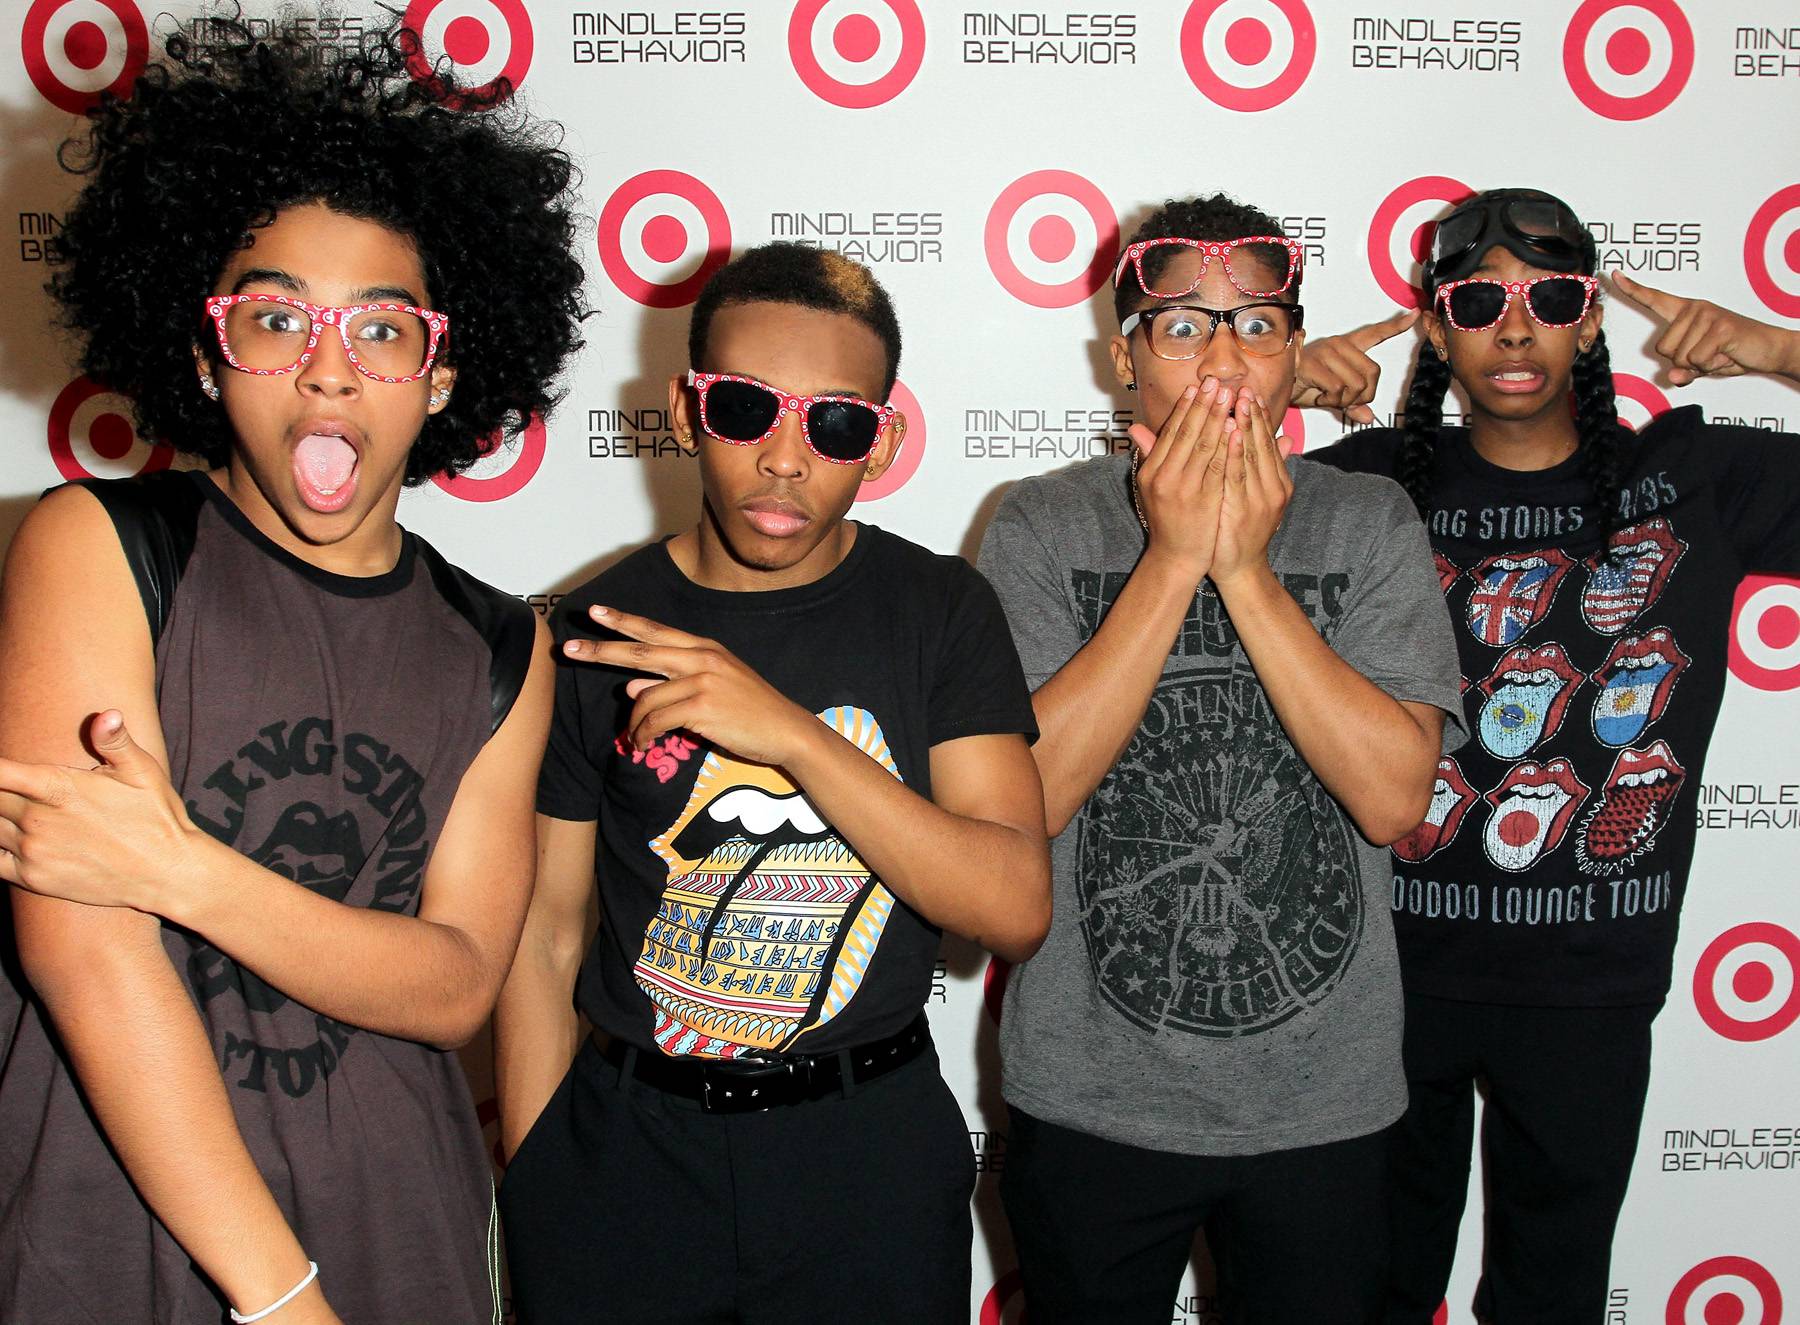 Mindless Behavior Target All Around the World Deluxe Release